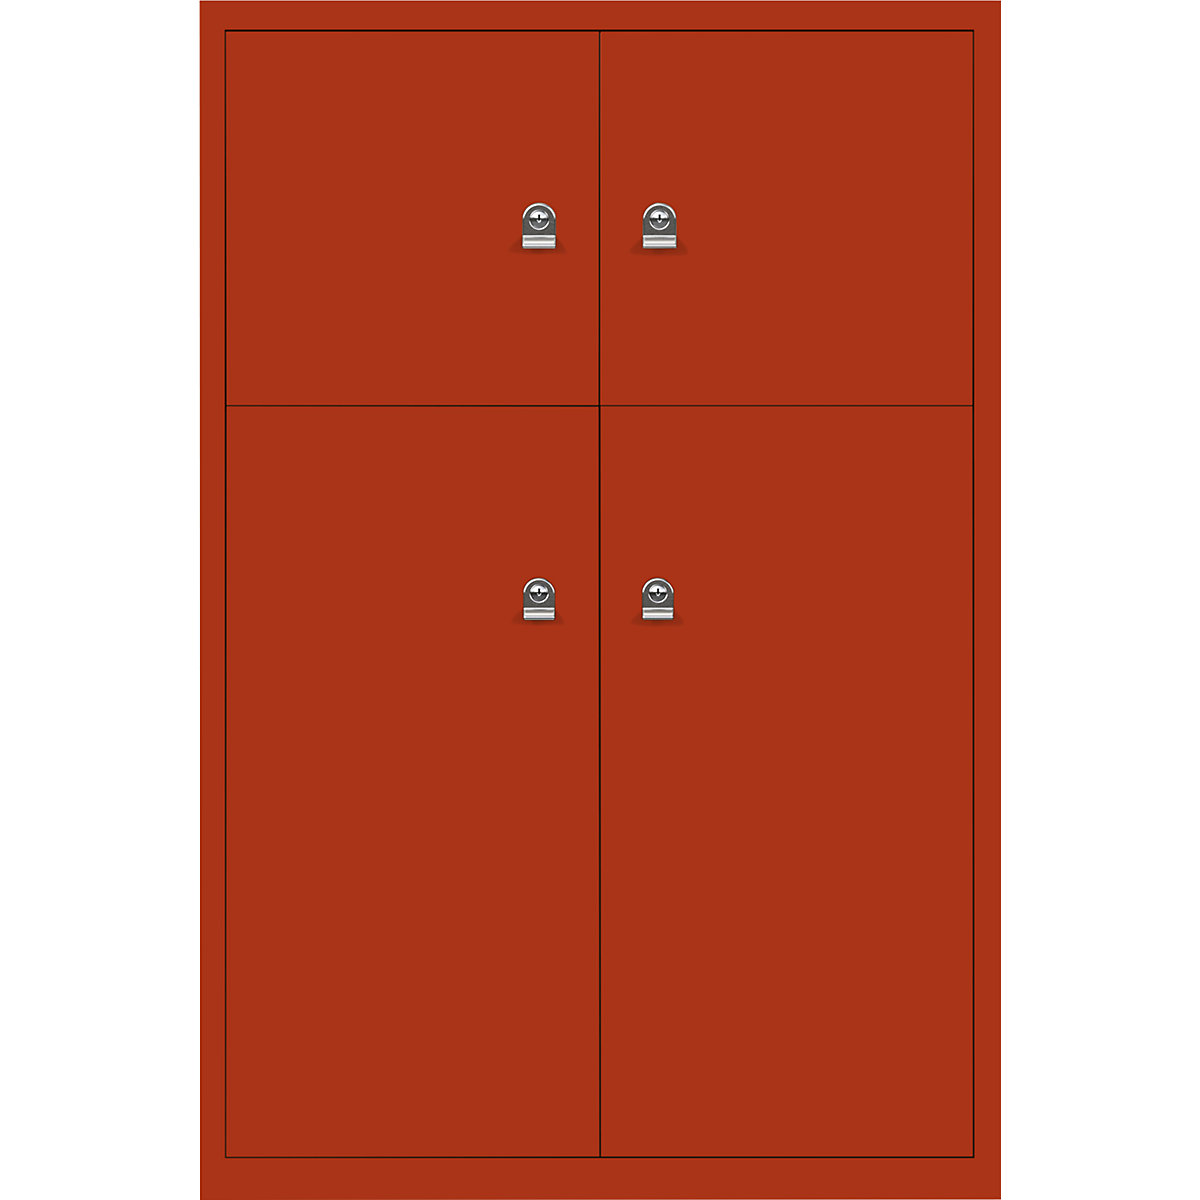 BISLEY – LateralFile™ lodge, with 4 lockable compartments, height 2 x 375 mm, 2 x 755 mm, sevilla